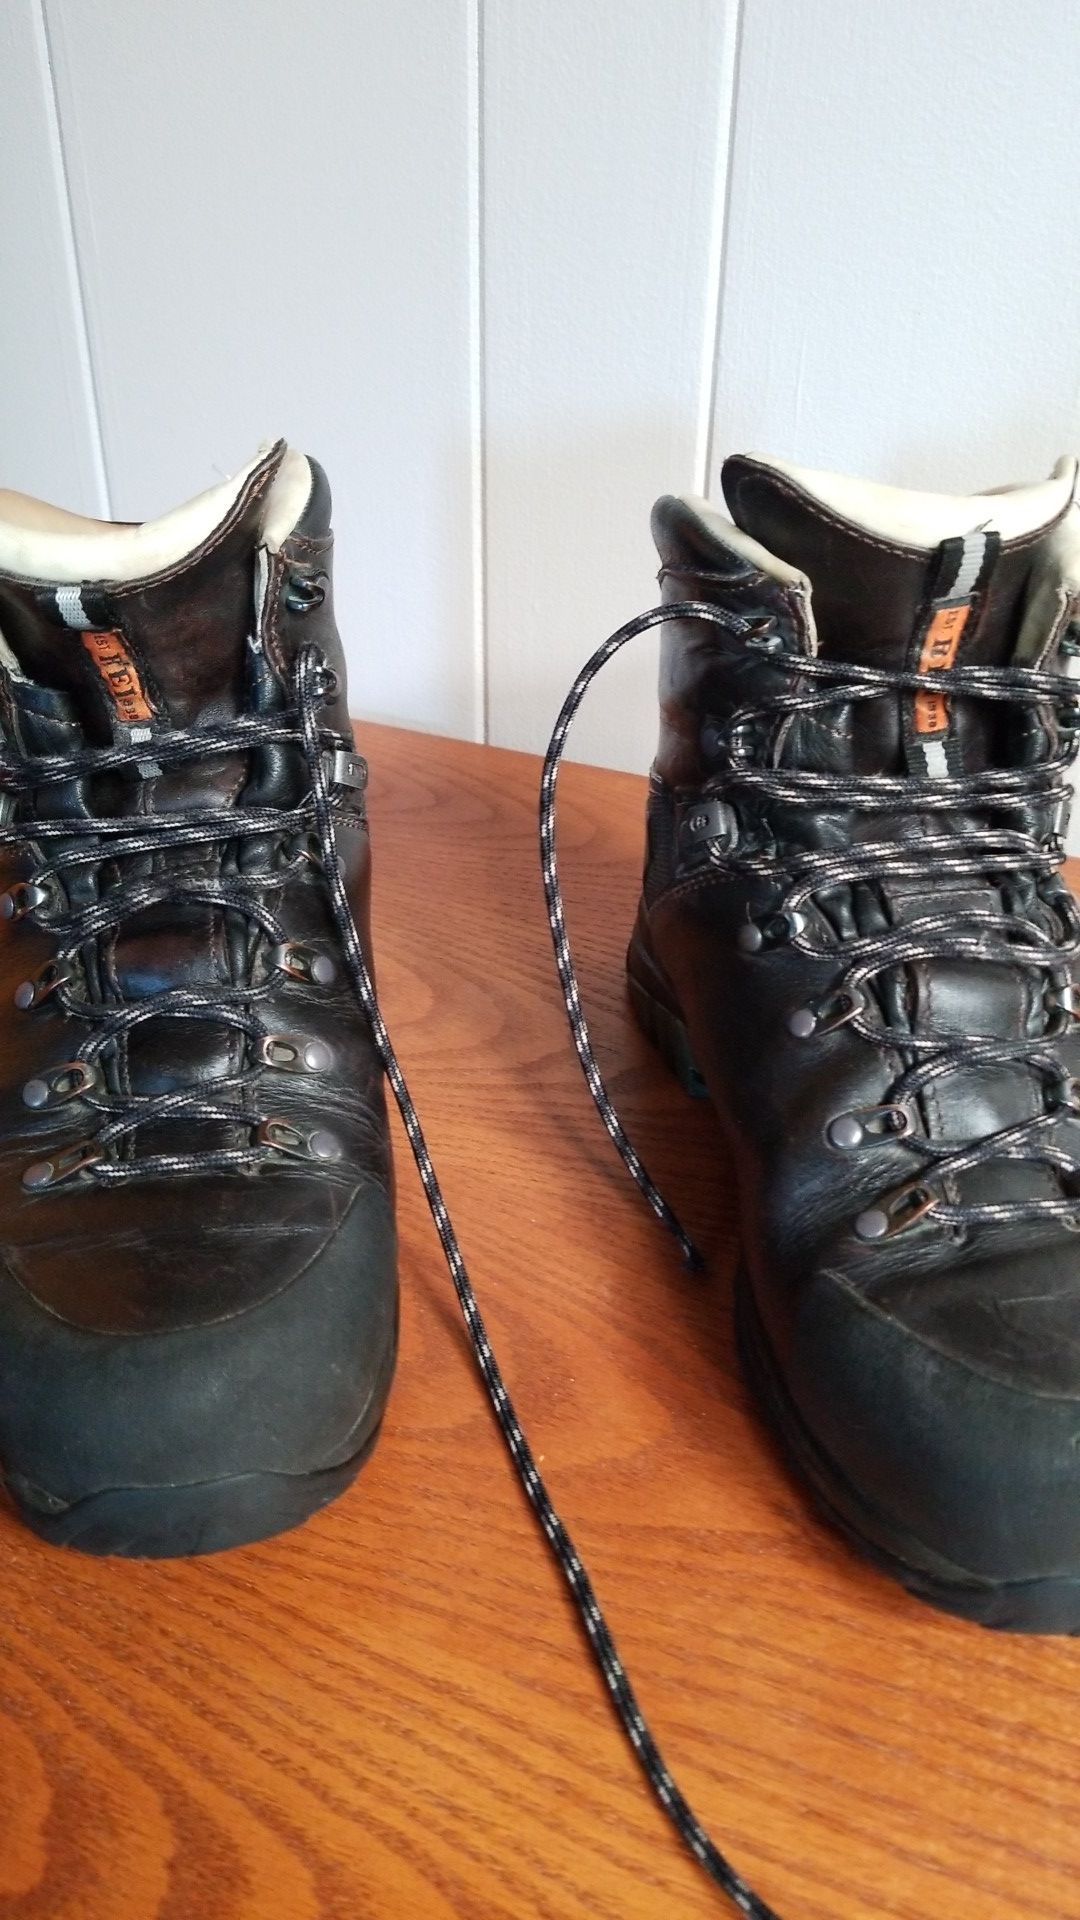 REI Men's Backpacking Boots, size 11M